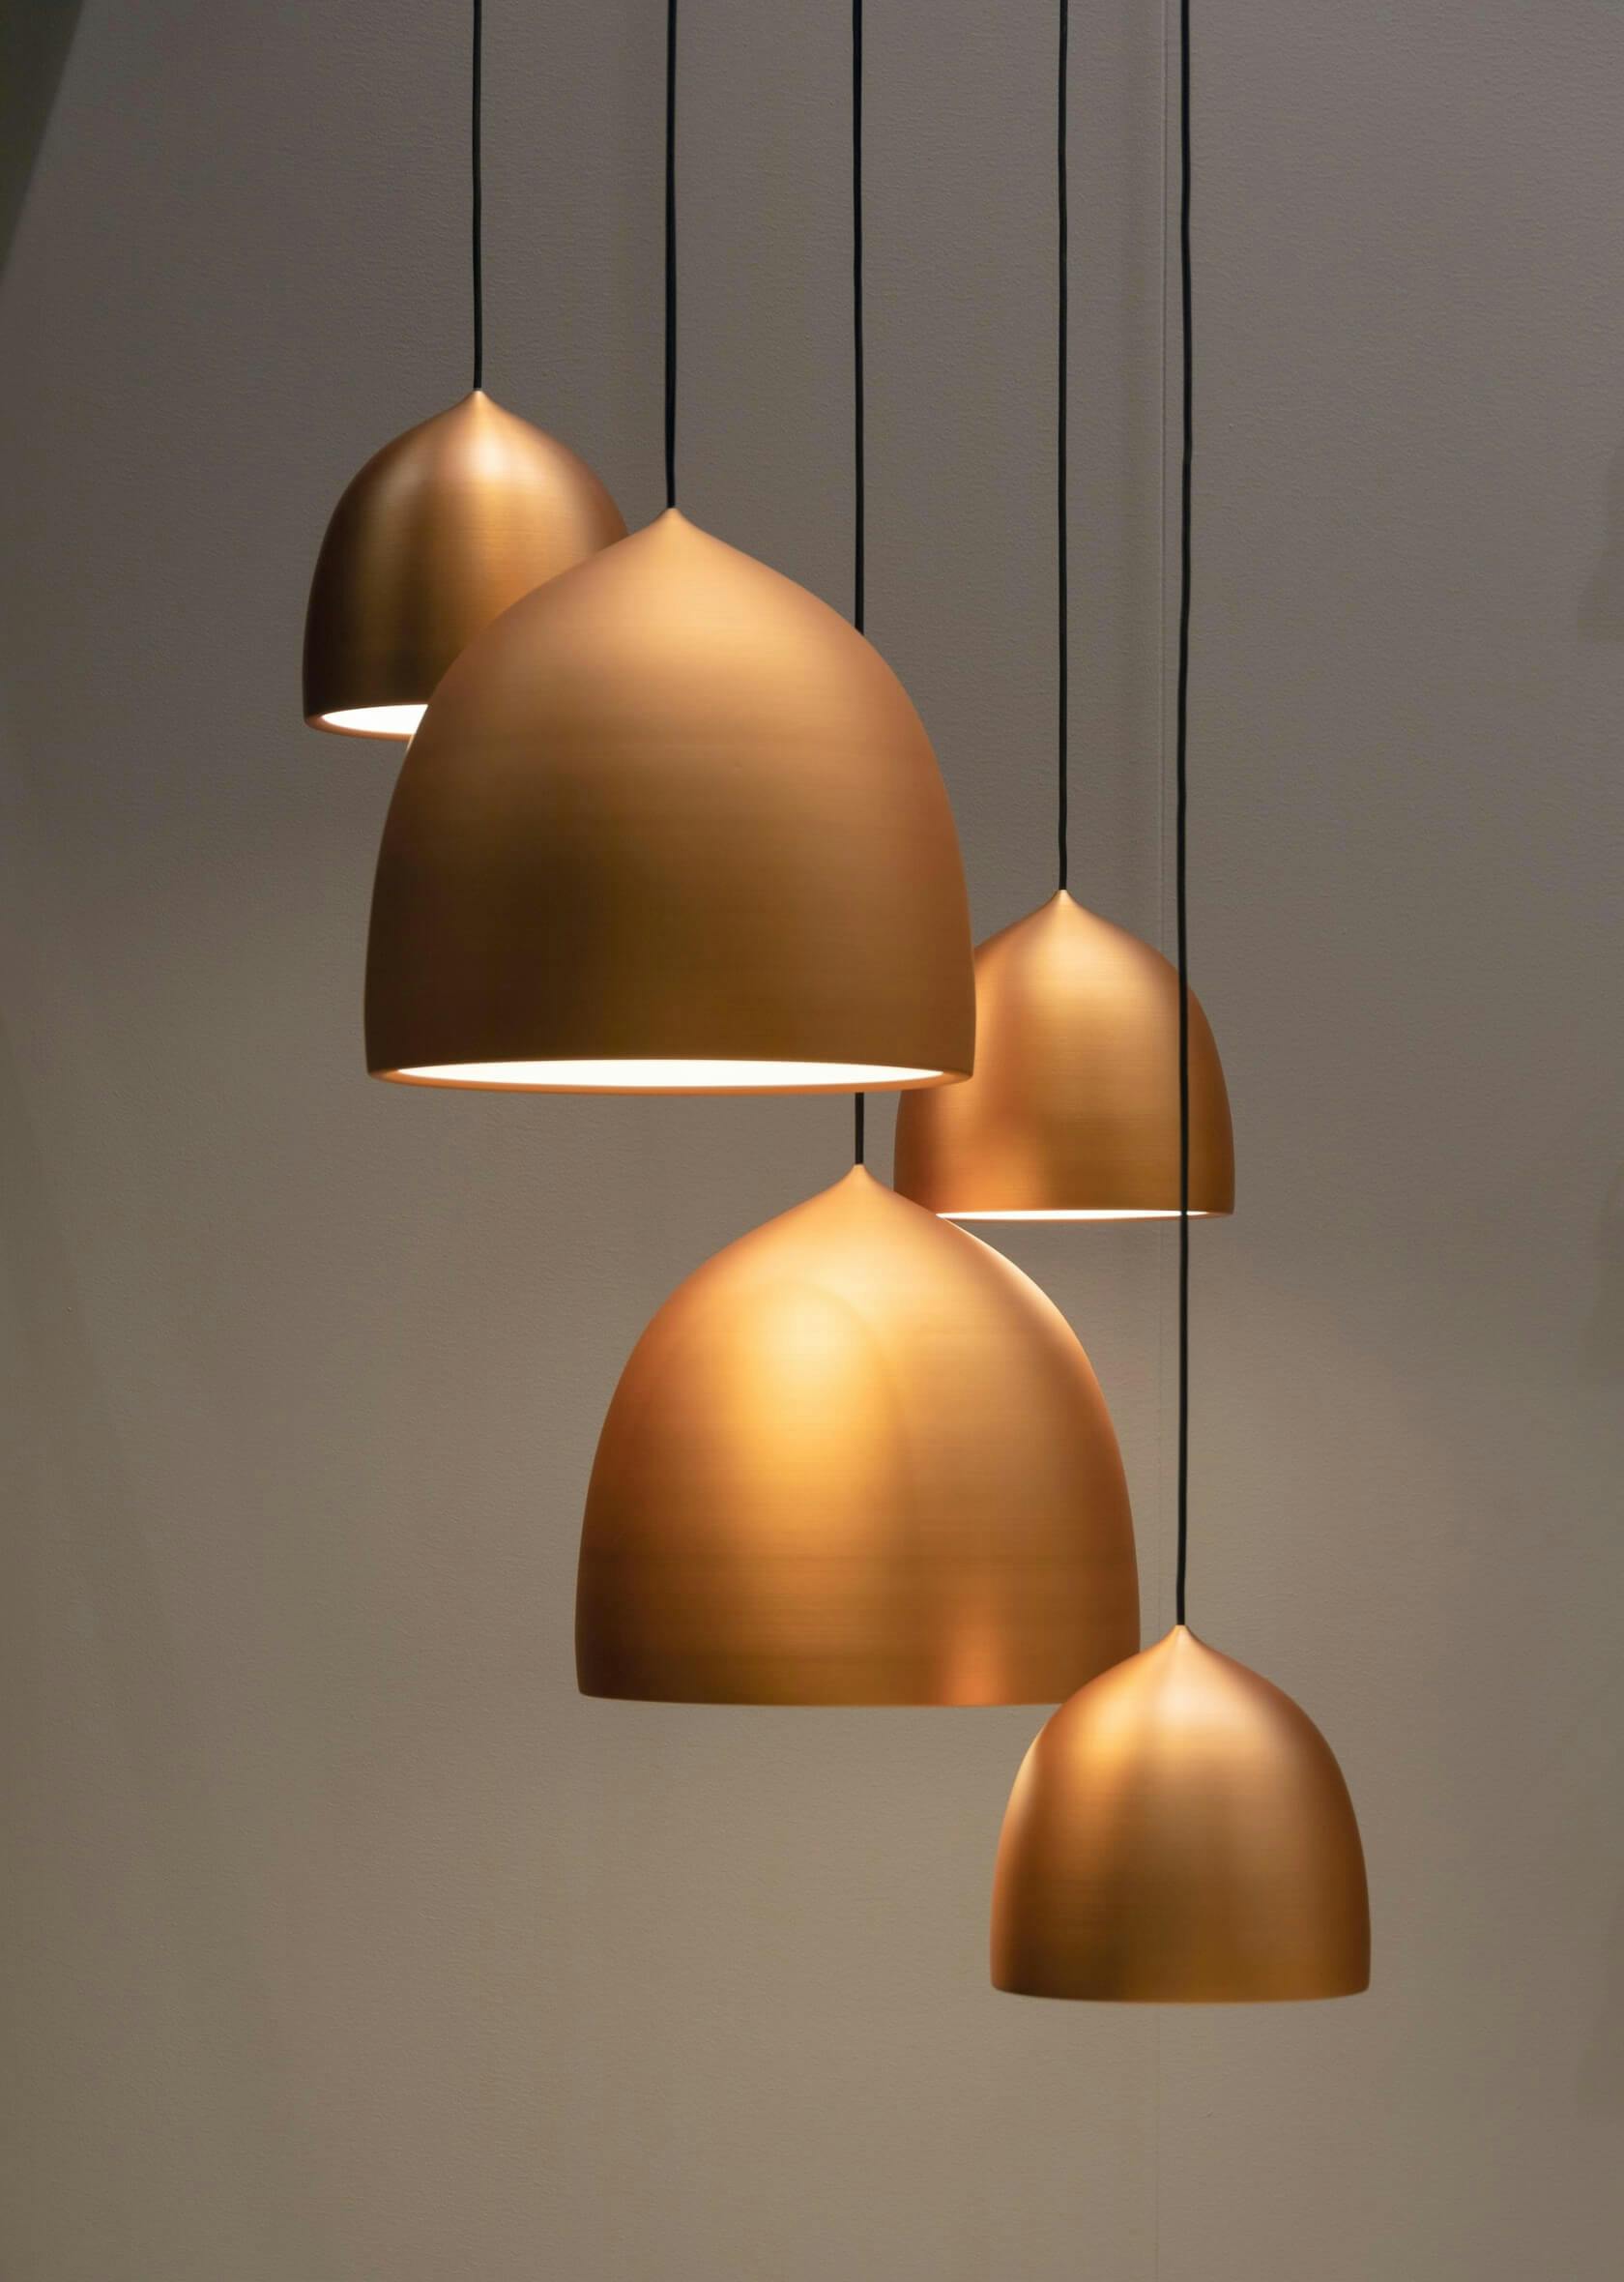 Pendant lights with bronze finish hanging from the ceiling